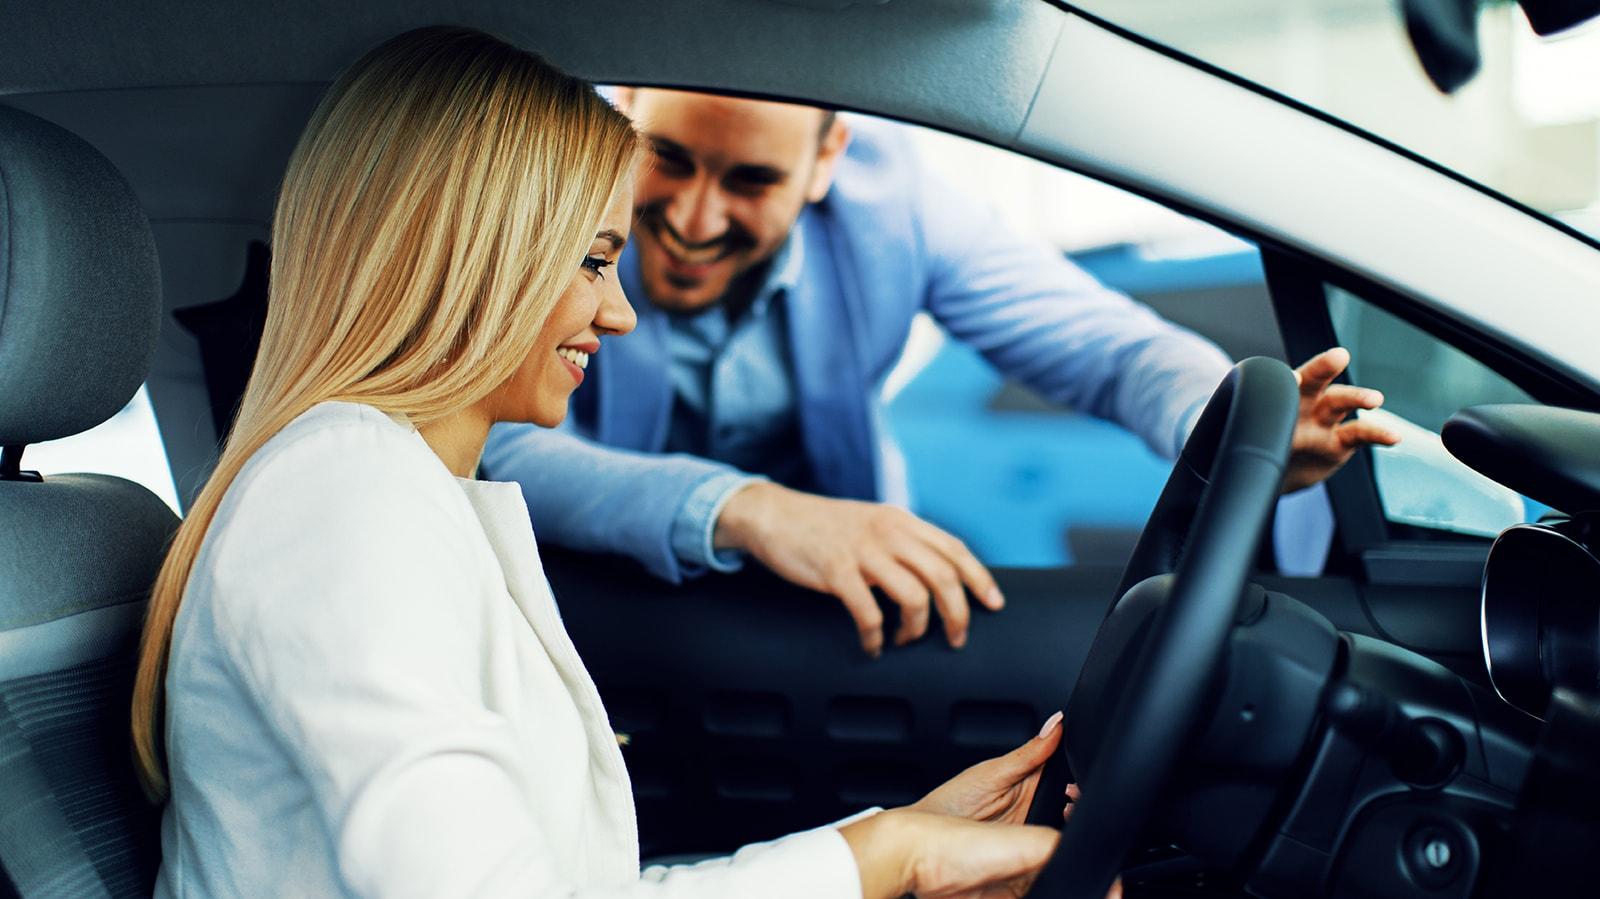 Smiling woman in a dealership sitting in a new vehicle